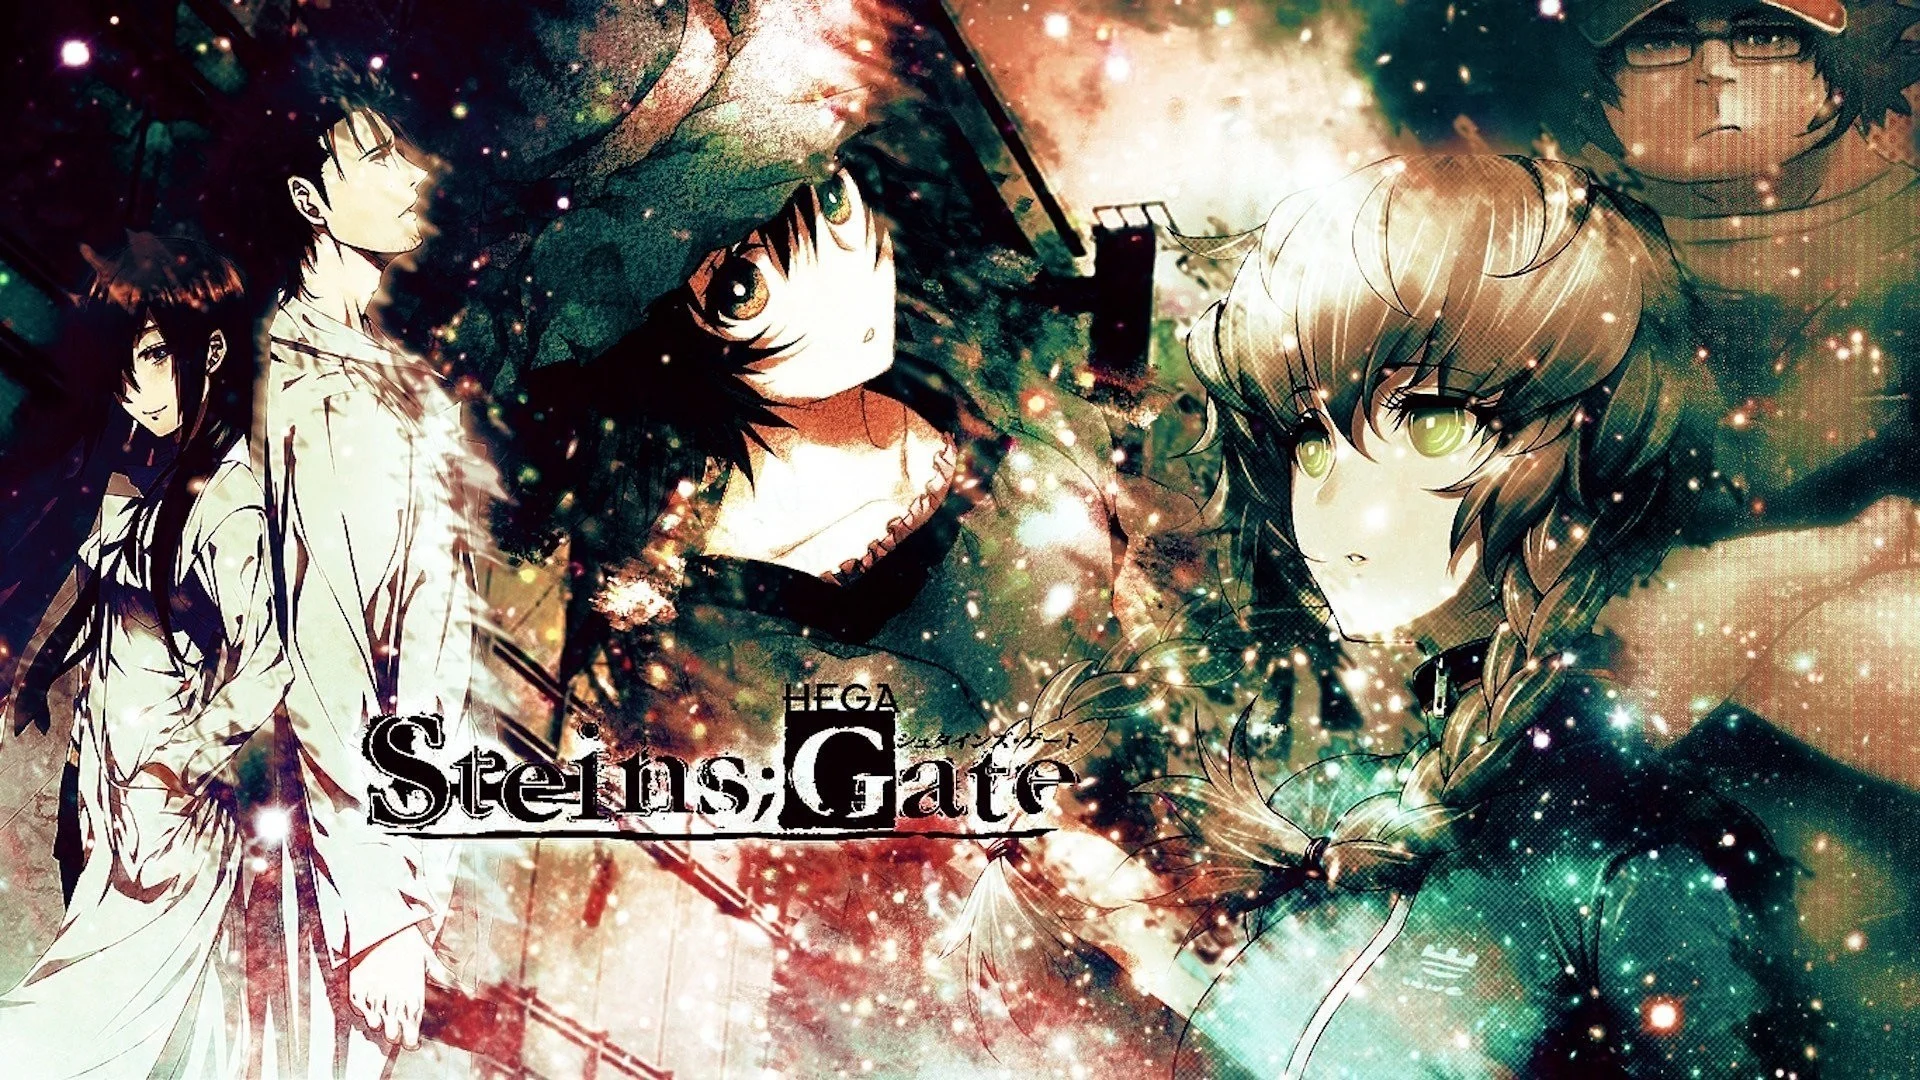 … steins gate wallpapers high quality download free …